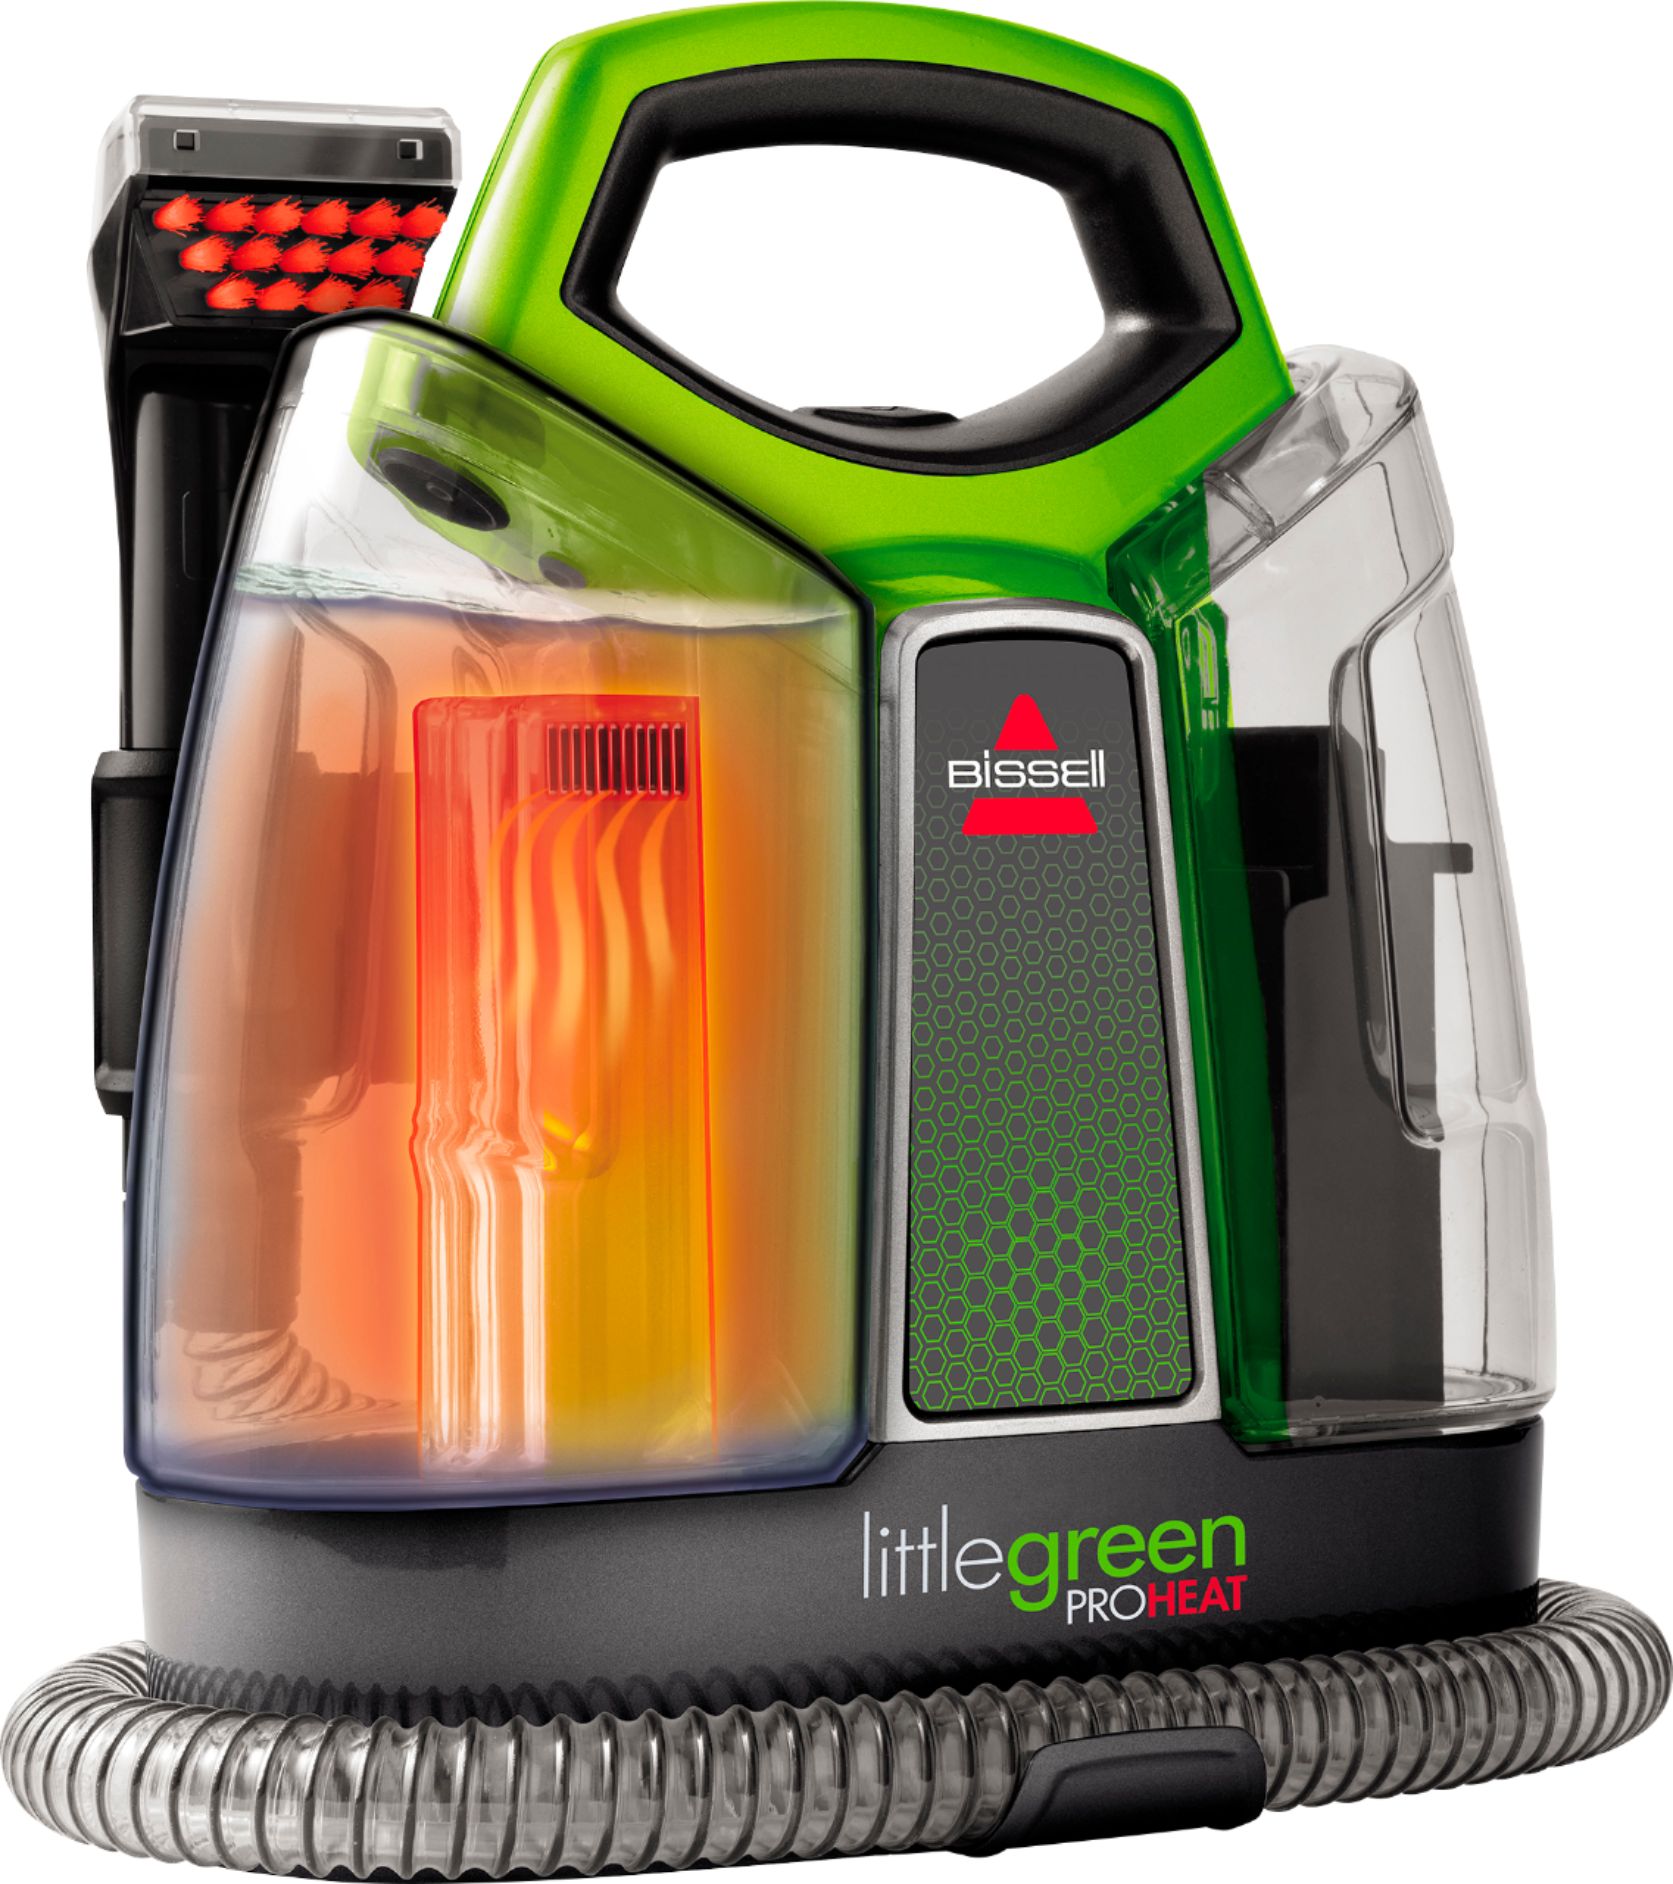 BISSELL - Little Green ProHeat Handheld Deep Cleaner - Titanium With Chacha Lime Accents